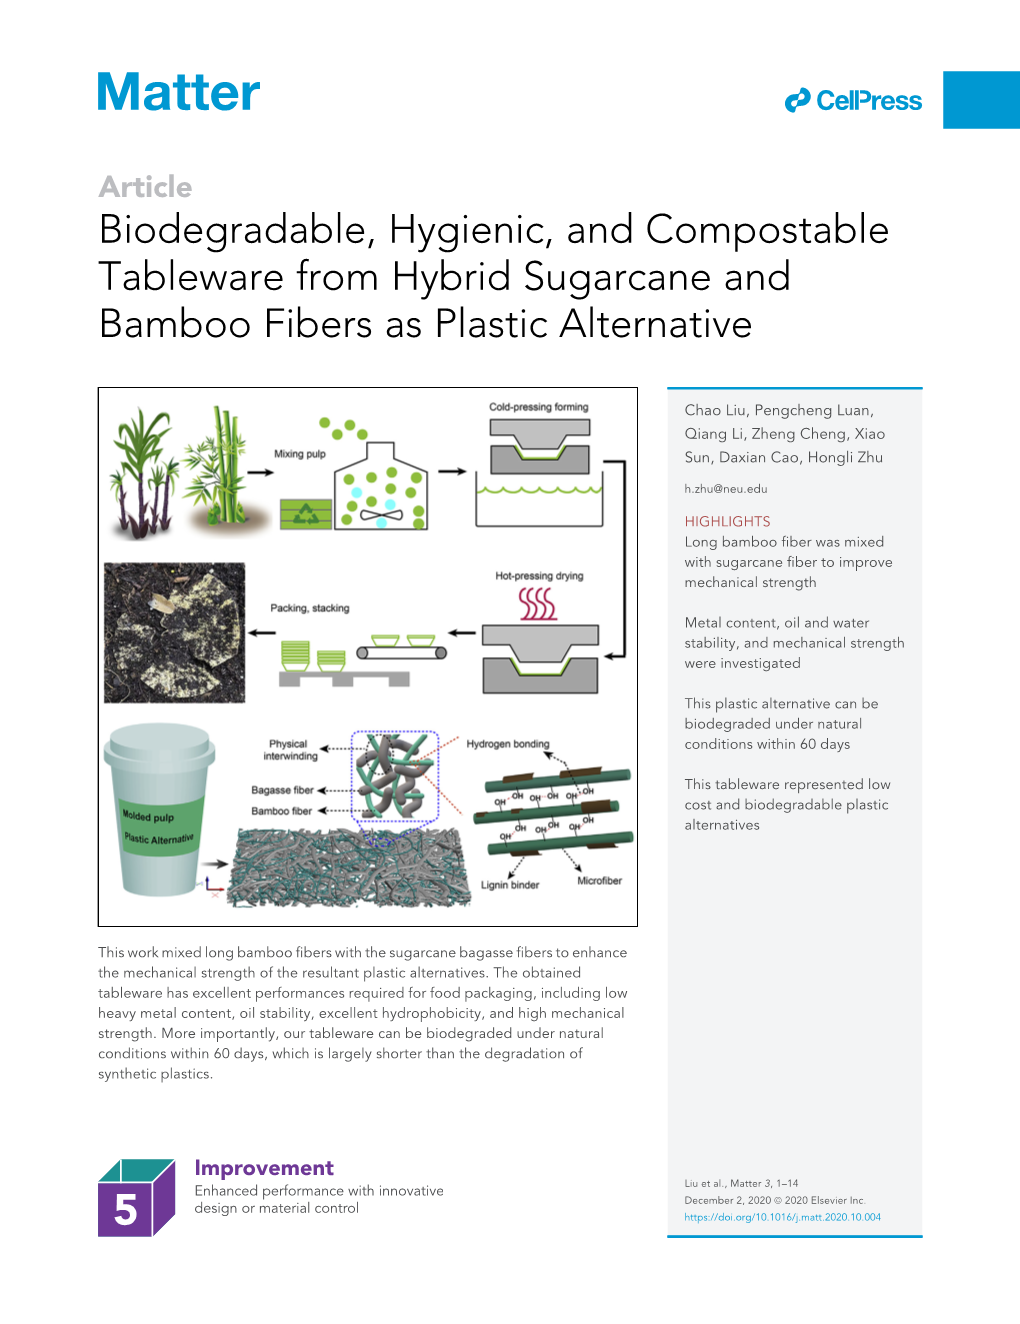 Biodegradable, Hygienic, and Compostable Tableware from Hybrid Sugarcane and Bamboo Fibers As Plastic Alternative